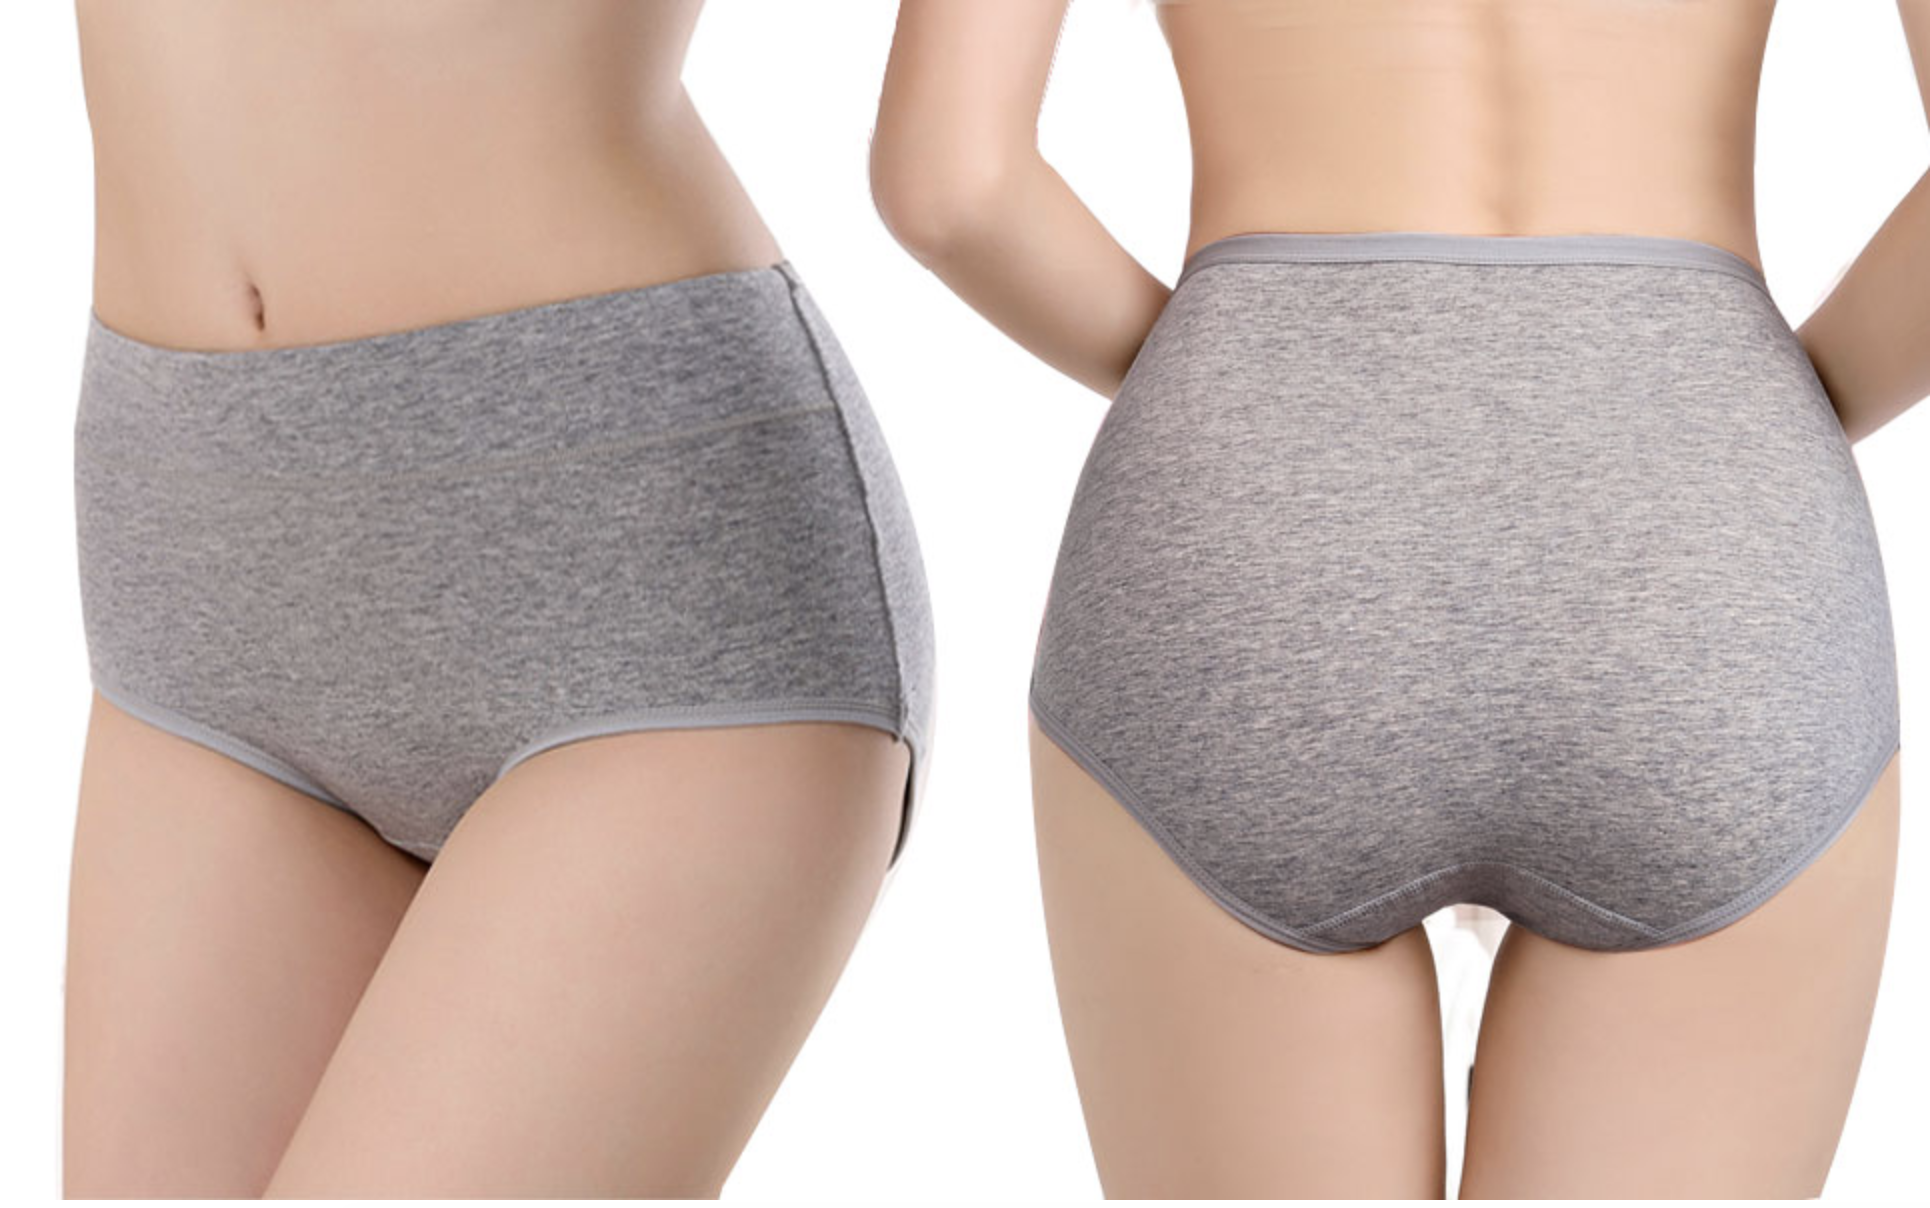 A model wearing a pair of underwear with full coverage from two angles, the front and the rear 